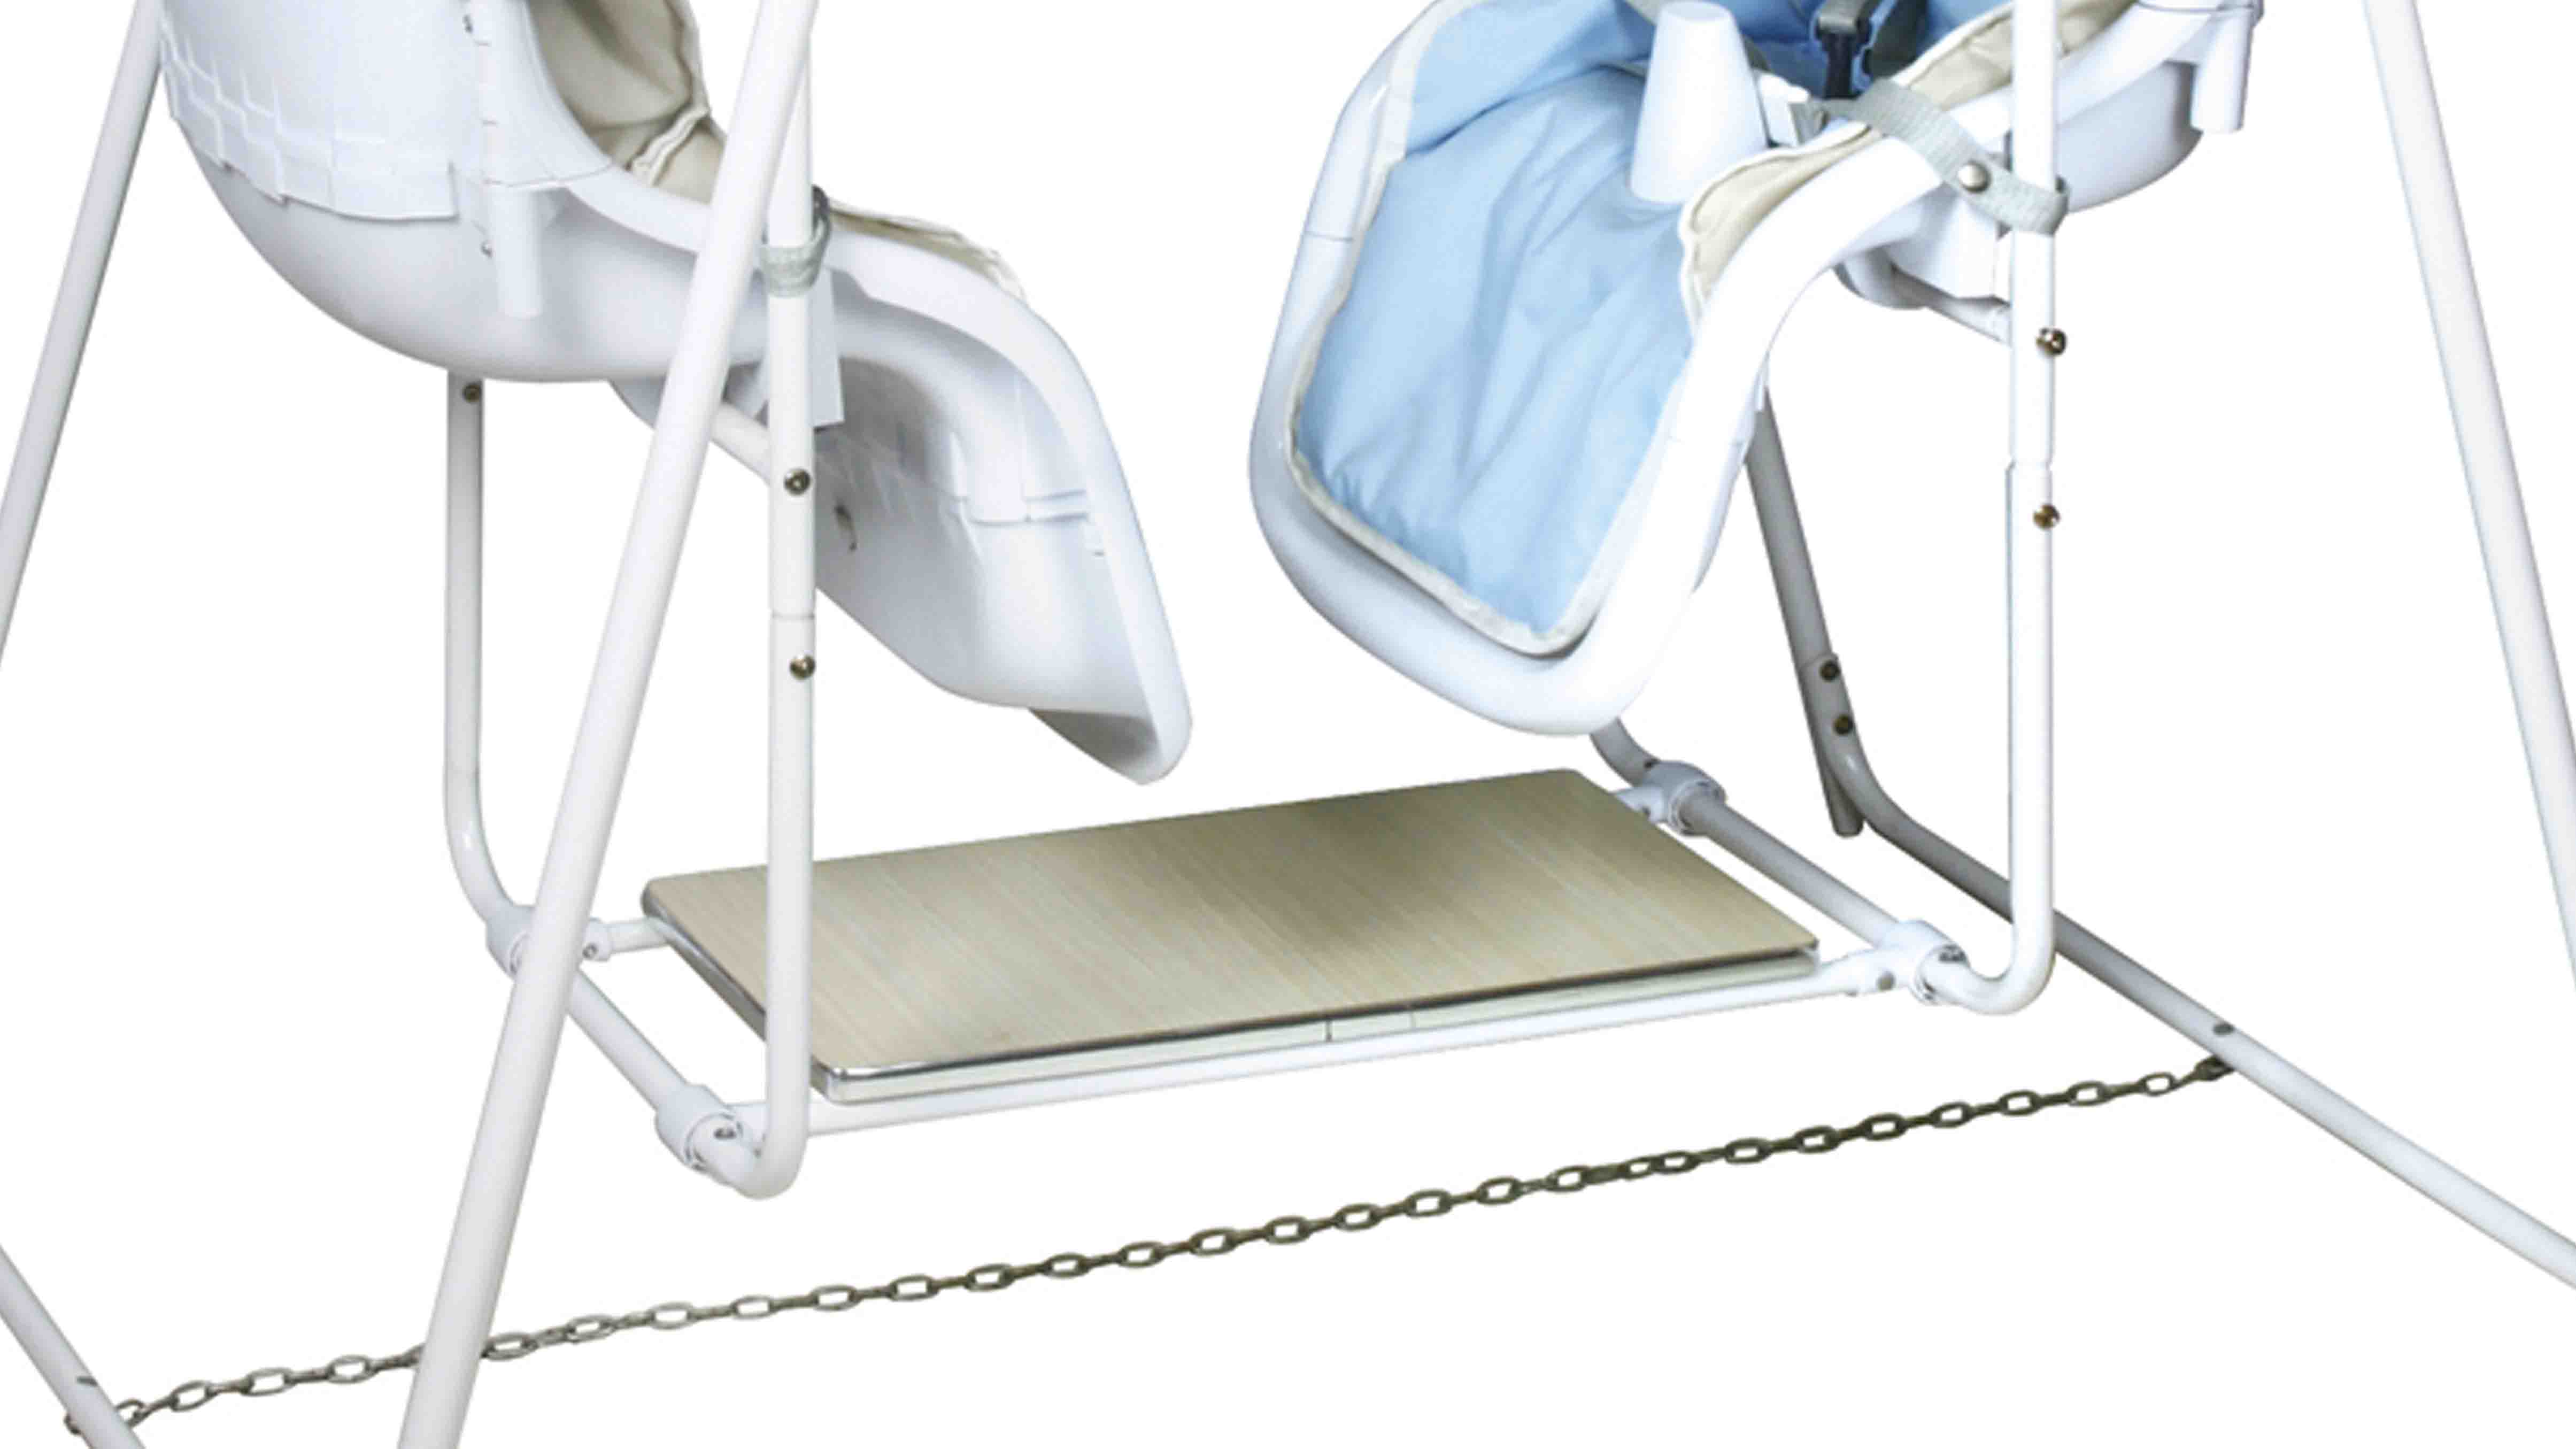 multifunctional baby swing price with good price for babys room